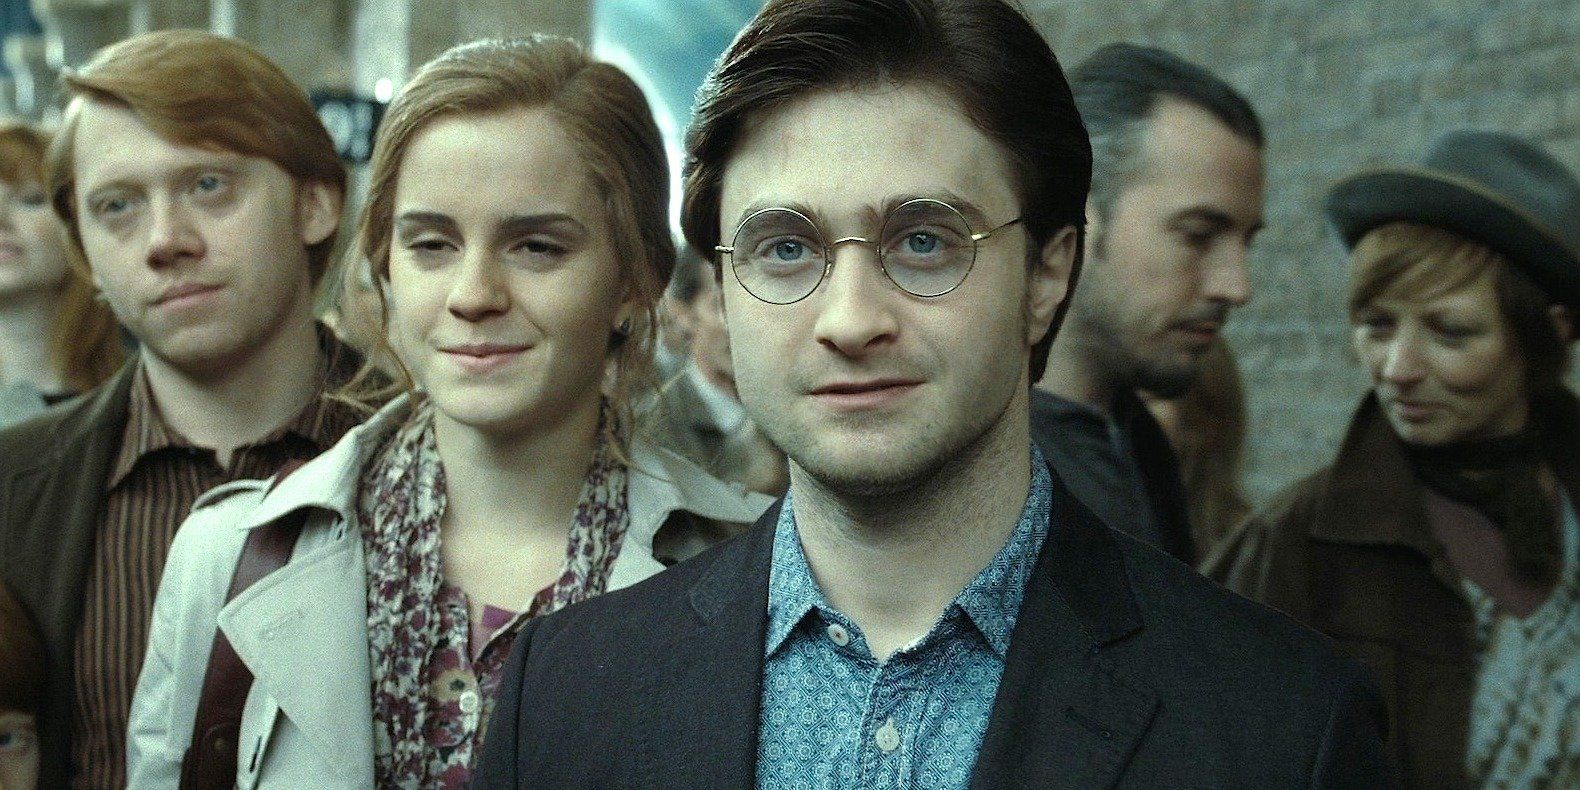 Cursed Child Harry Potter Movie Reportedly Part Of New WB Head’s Plan